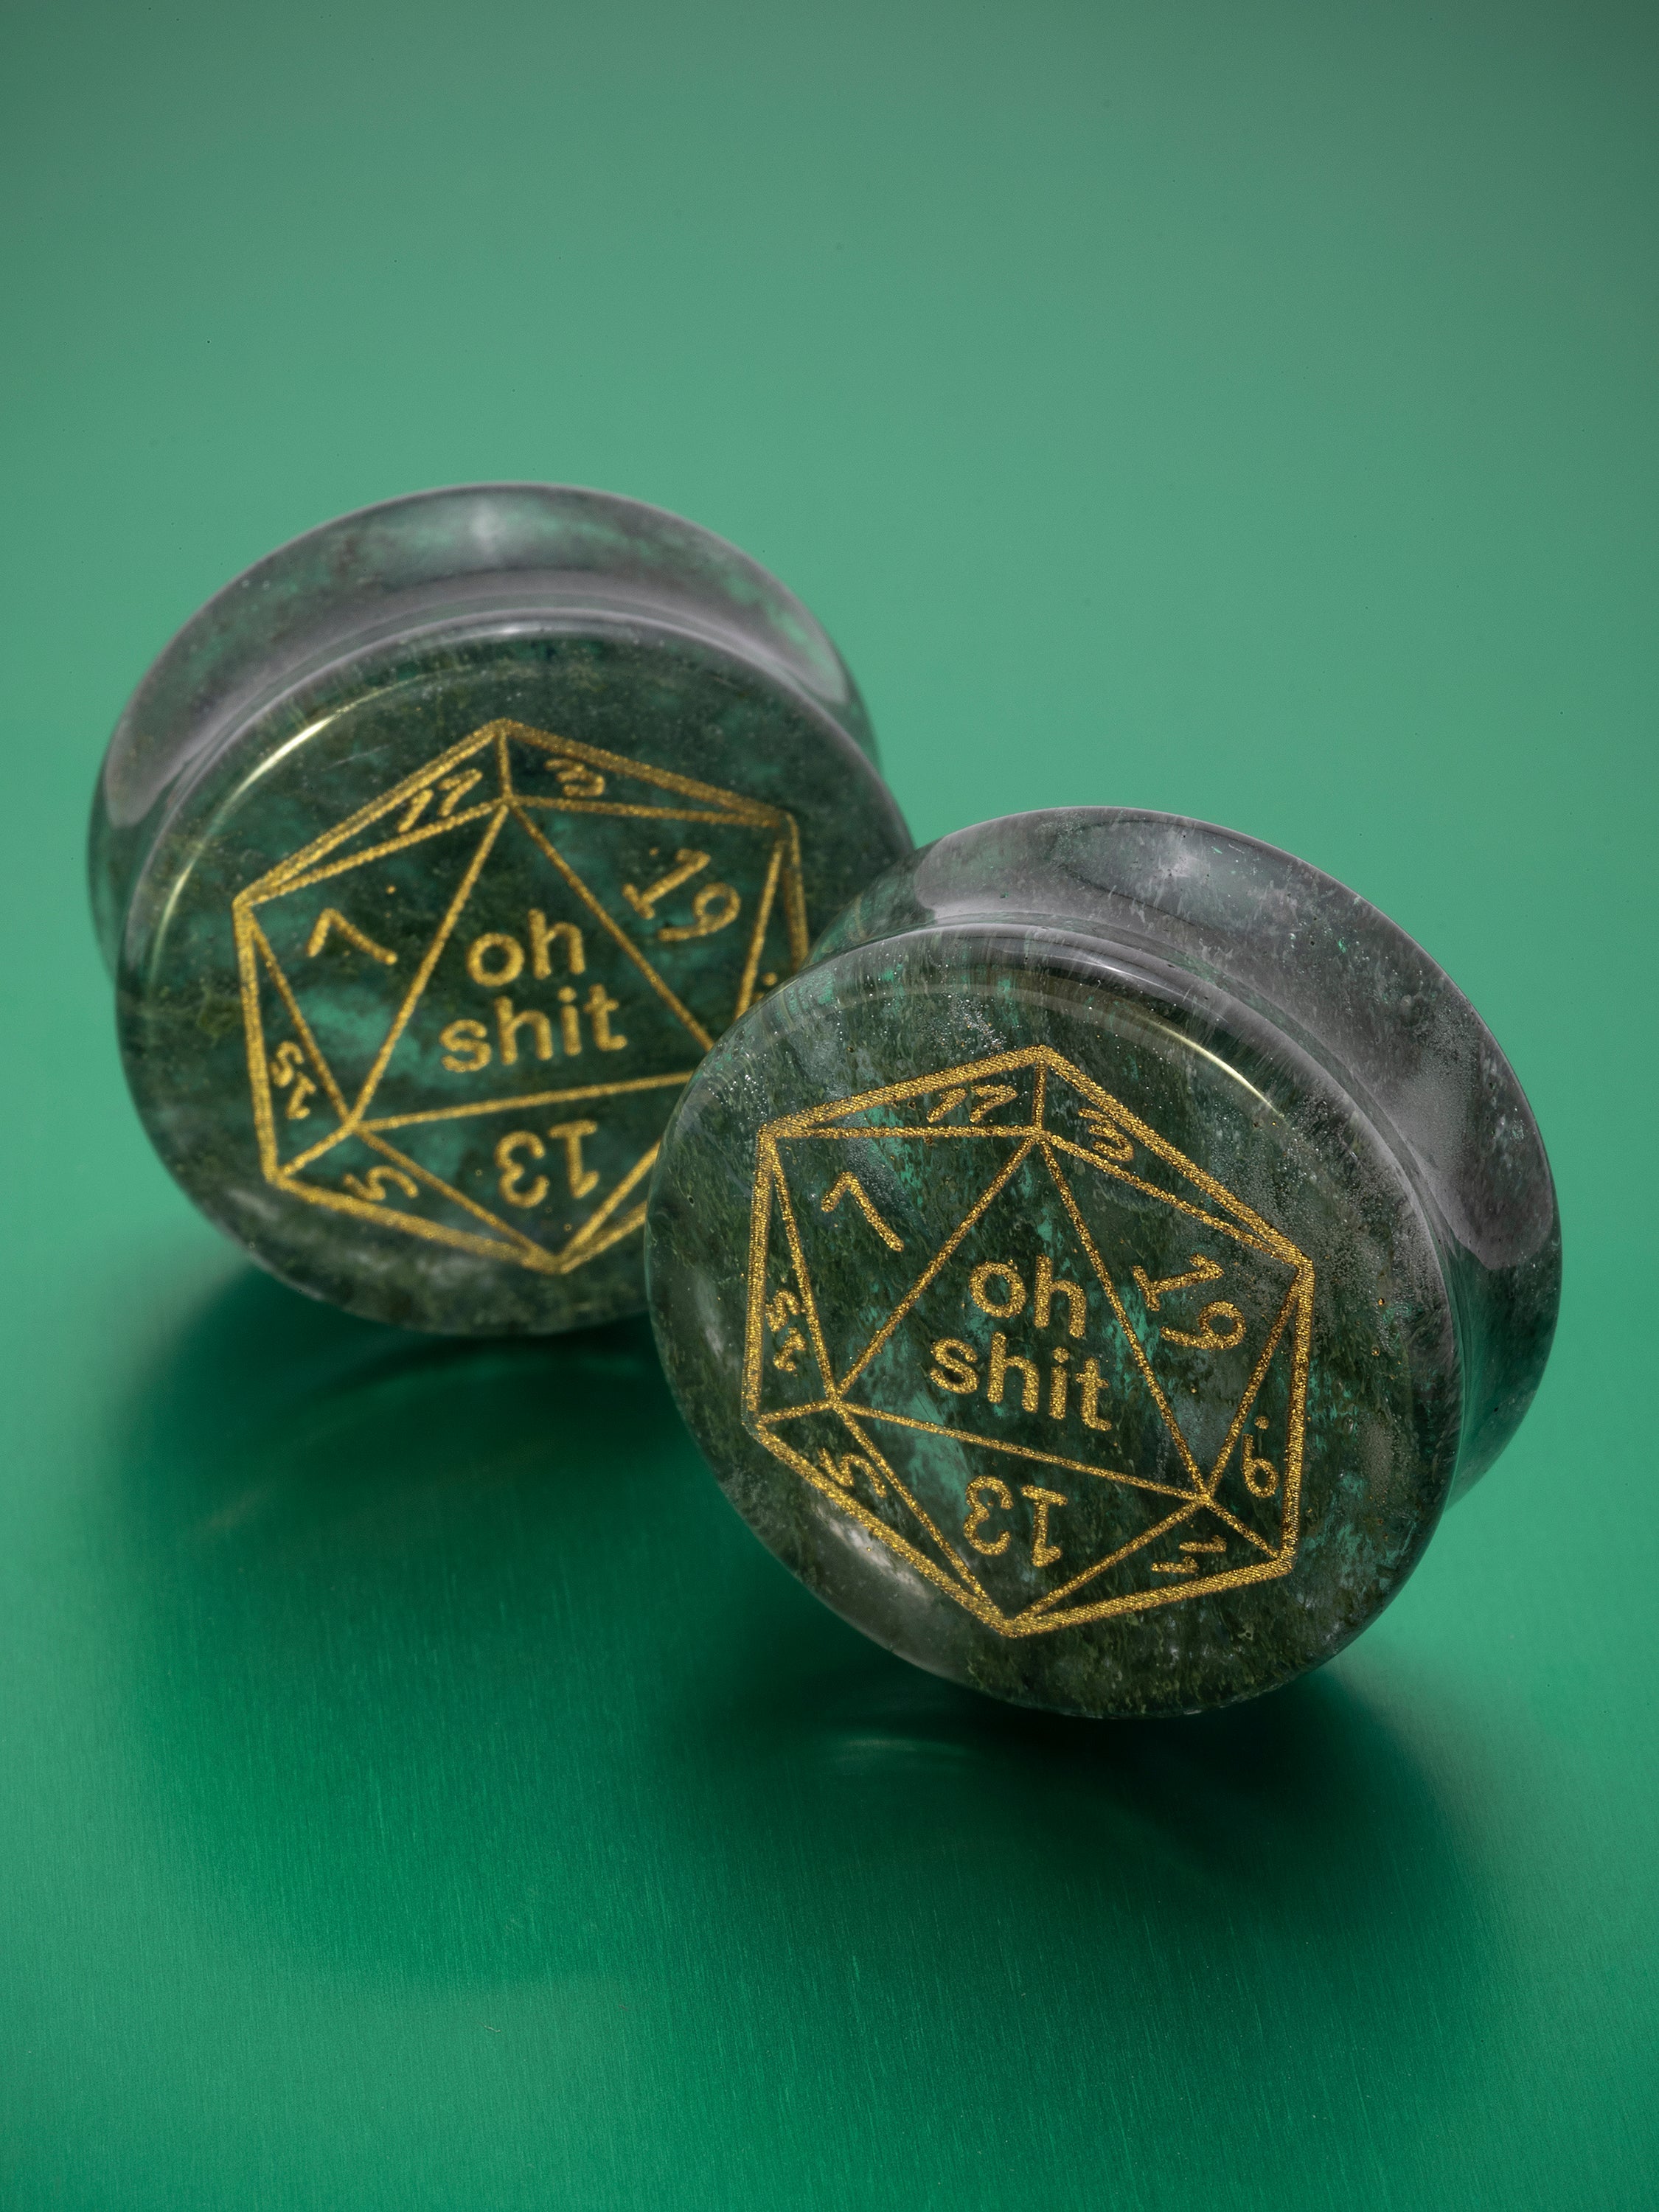 Not Mine - Dice Chips - Most Expensive Ever?